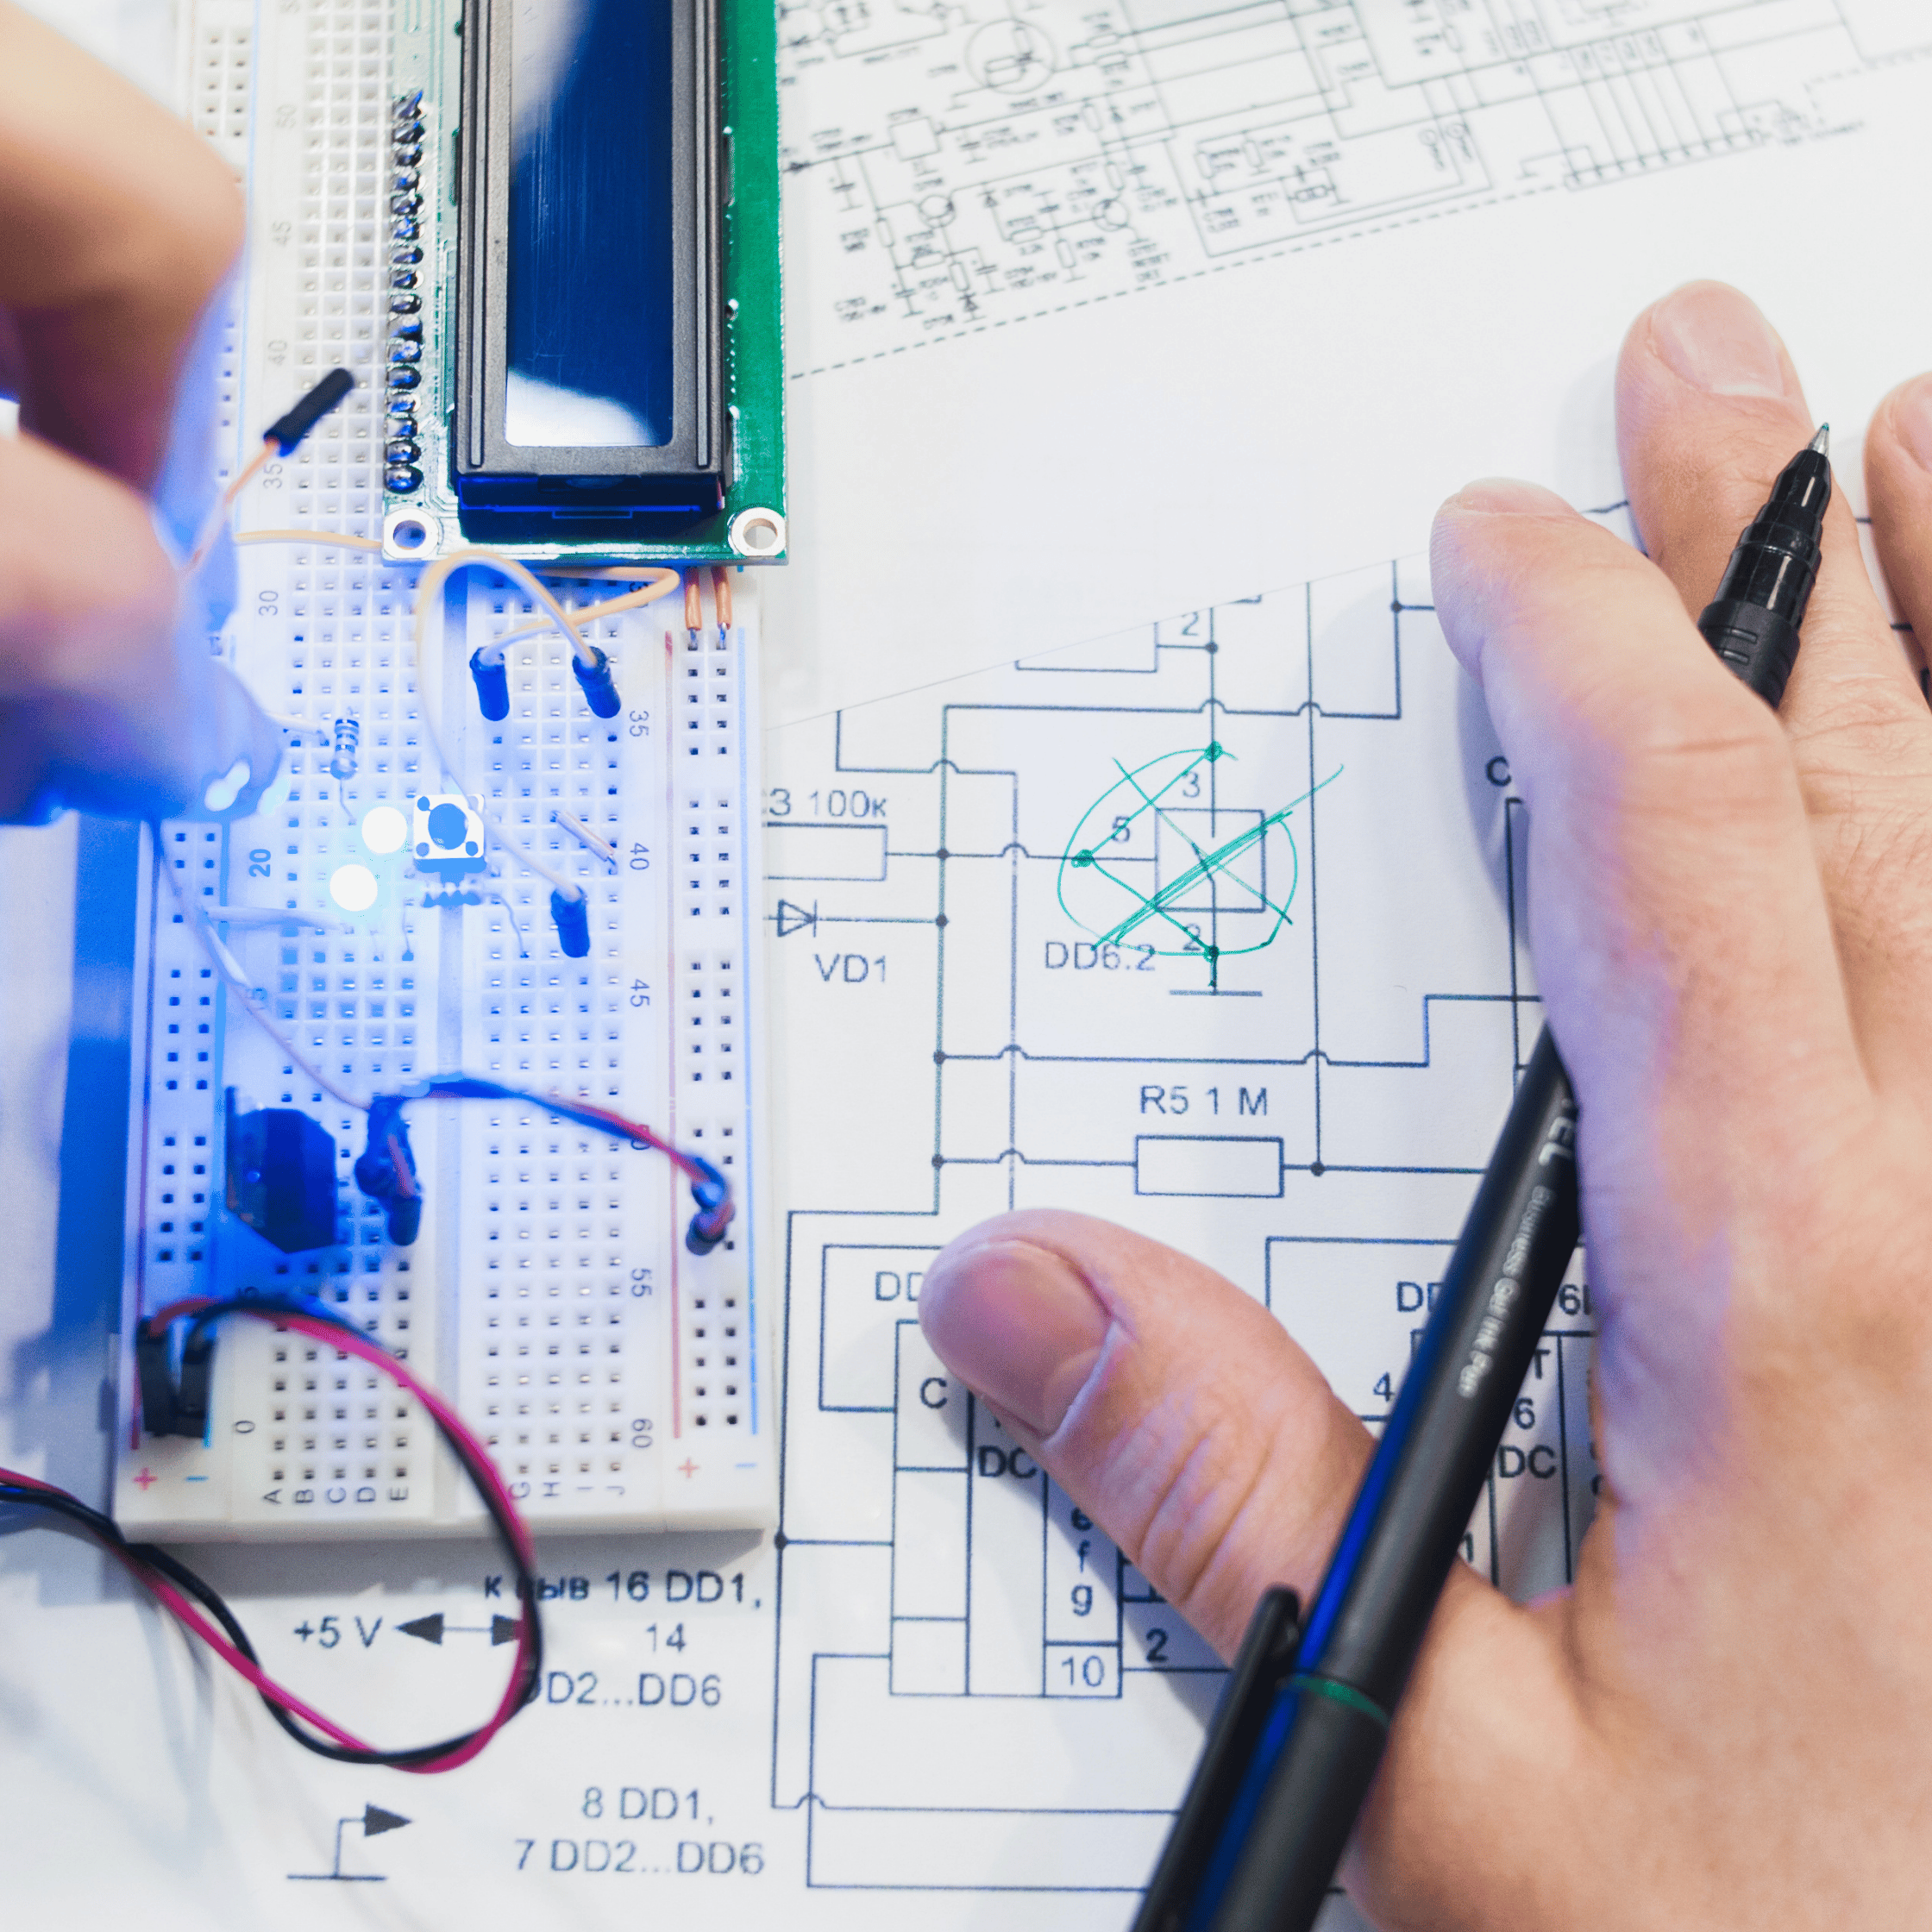 A overhead shot of an engineering working on electronics systems design